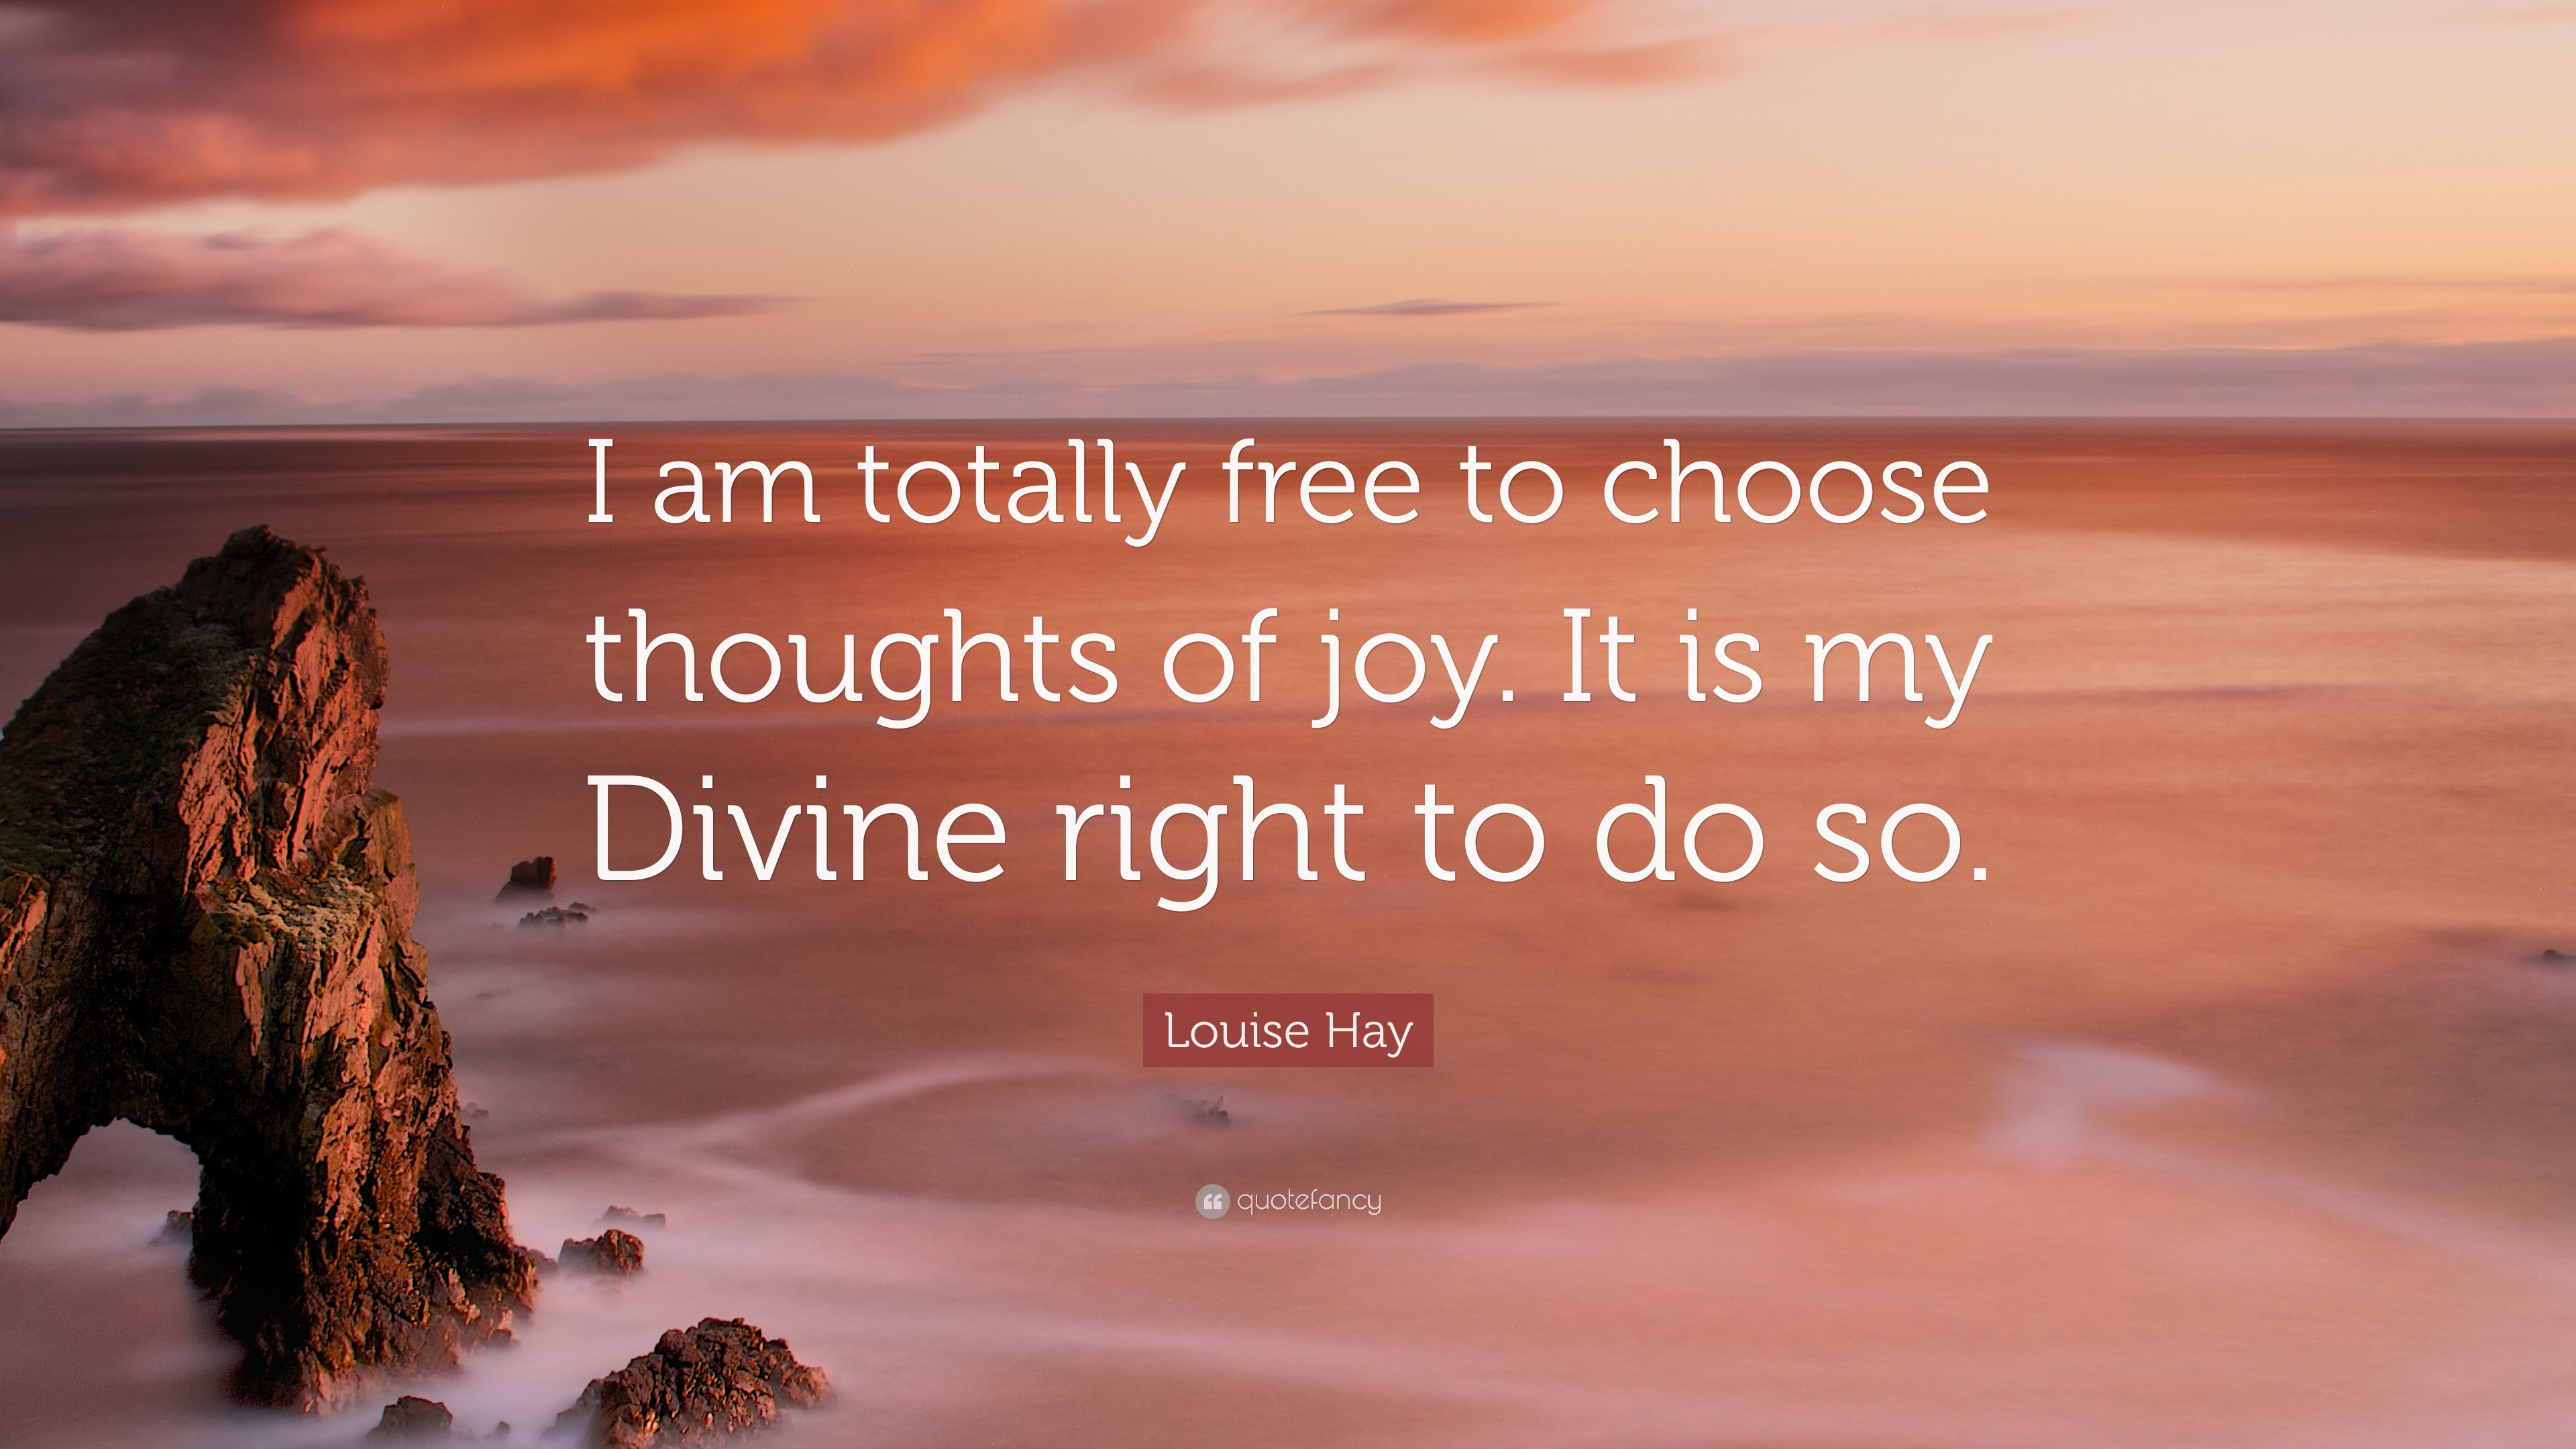 Louise Hay Quote “i Am Totally Free To Choose Thoughts Of Joy It Is My Divine Right To Do So”